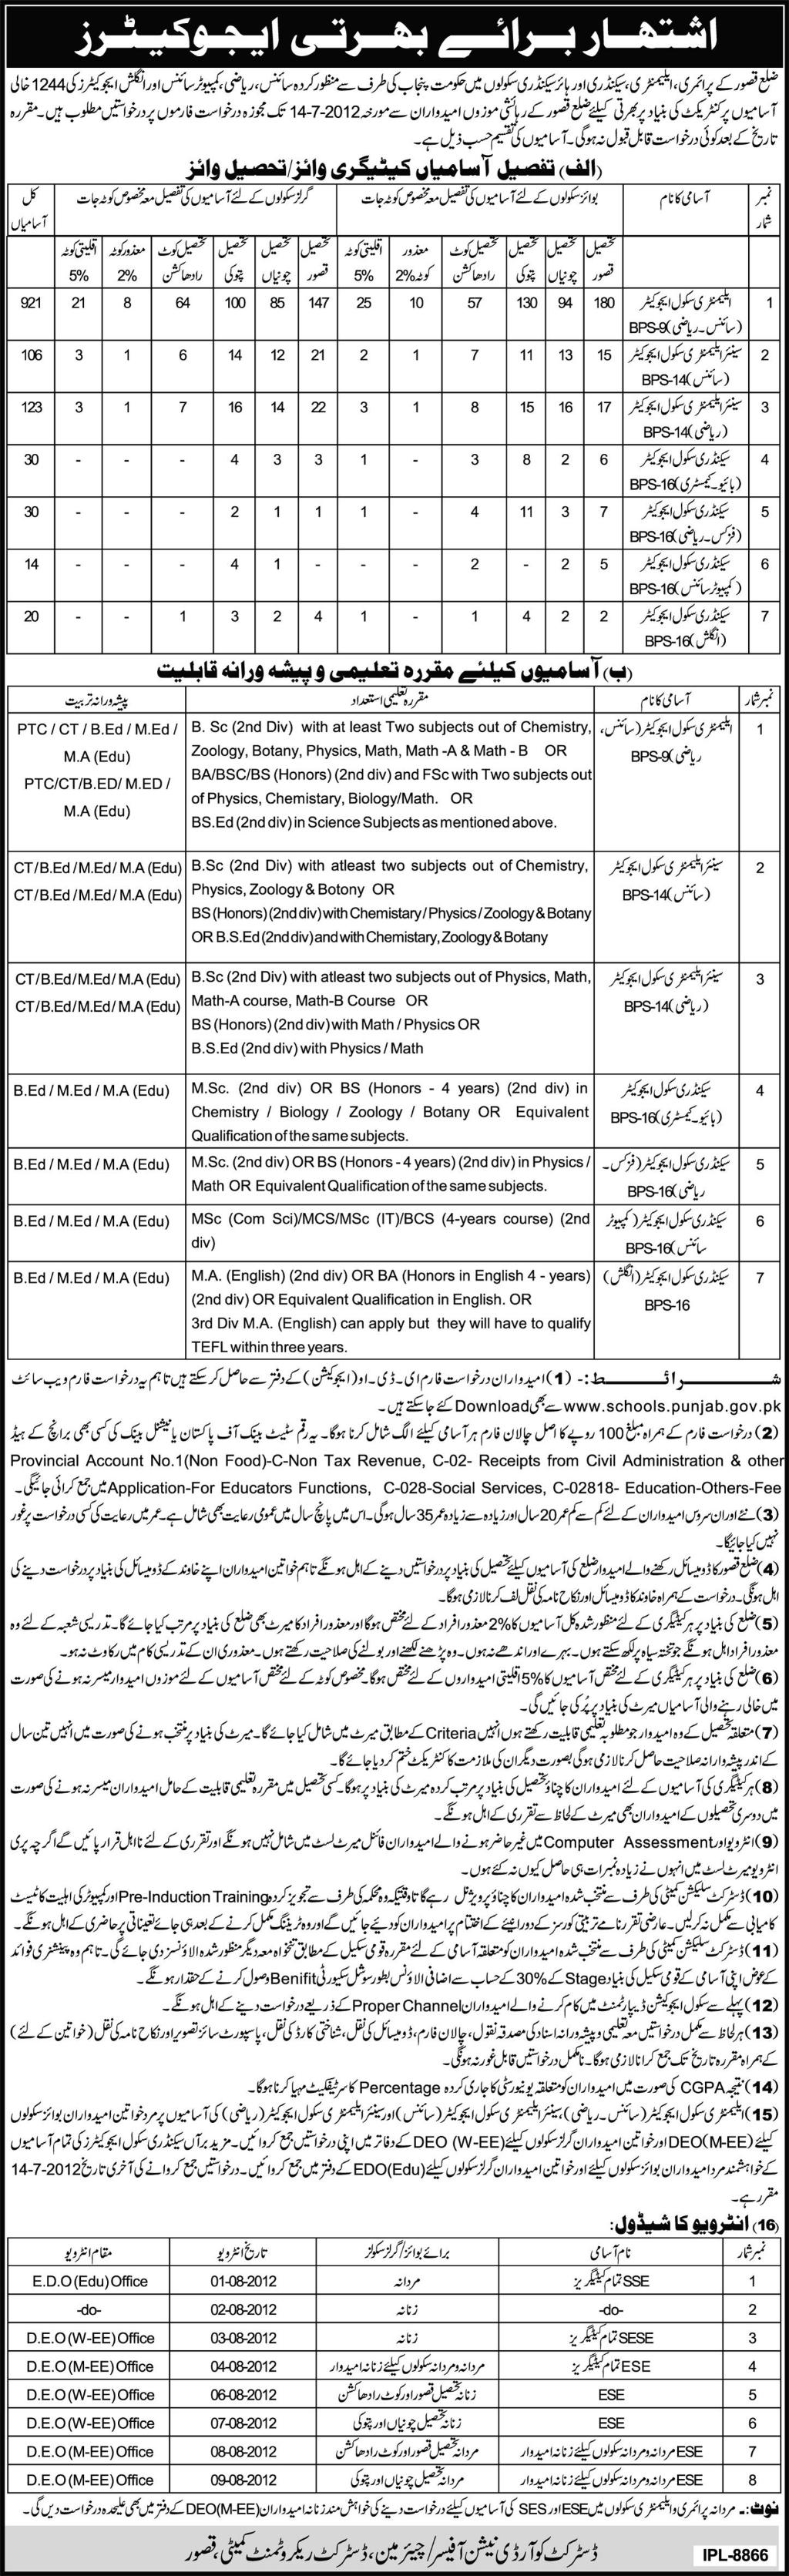 Teachers/Educators Required by Government of Punjab at Primary, Elementary, Secondary and Higher Secondary Schools (Qasoor District) (1244 Vacancies) (Govt. Job)